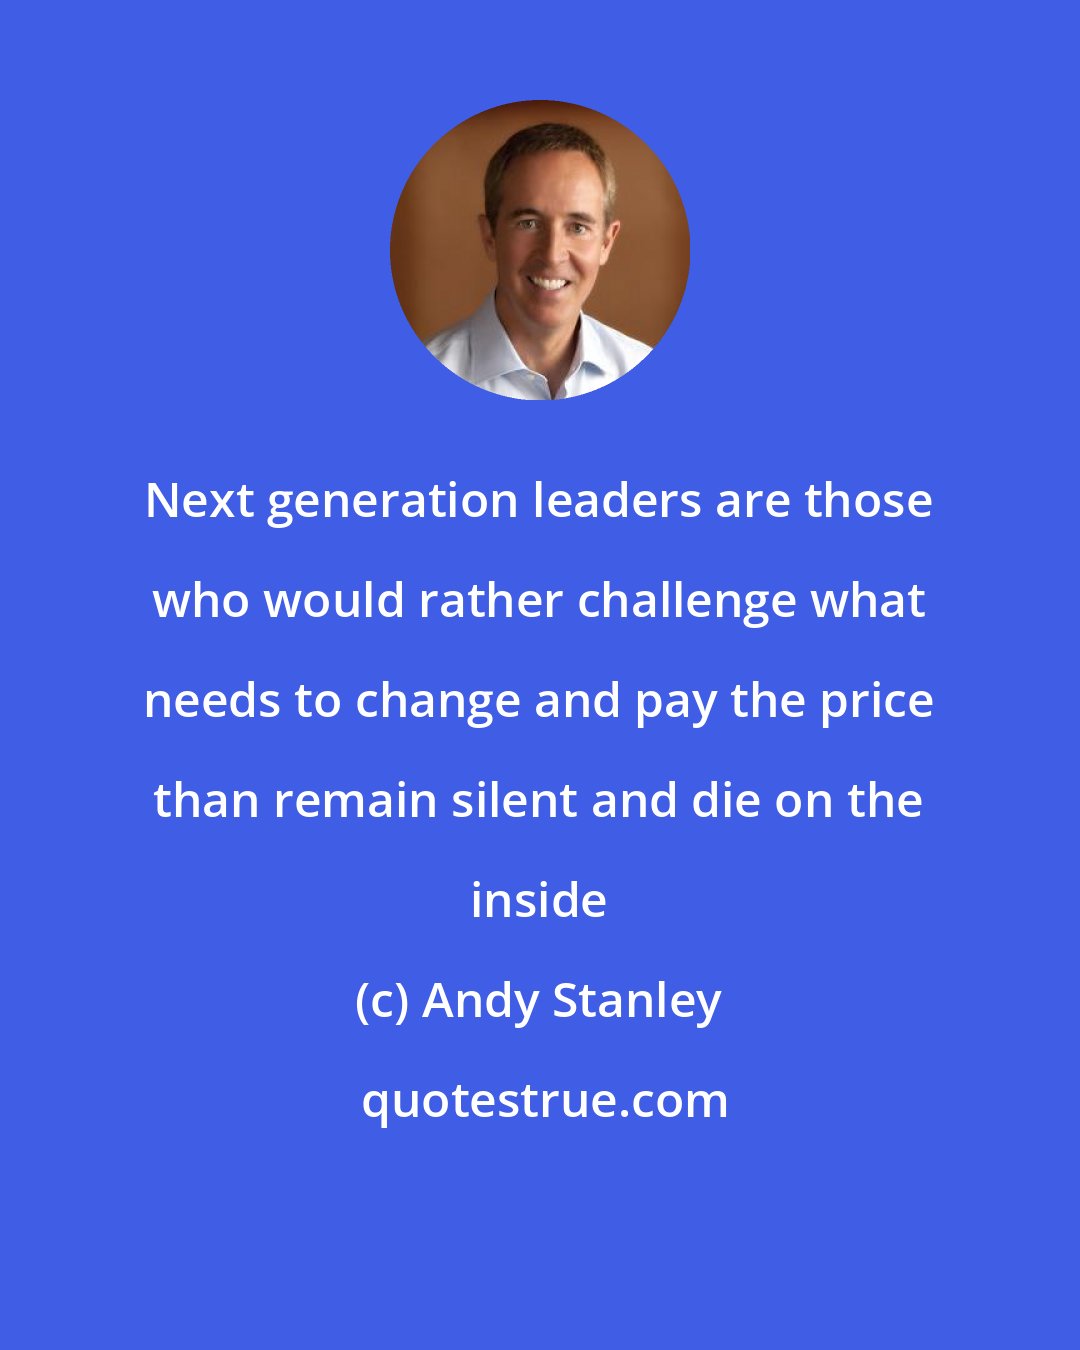 Andy Stanley: Next generation leaders are those who would rather challenge what needs to change and pay the price than remain silent and die on the inside